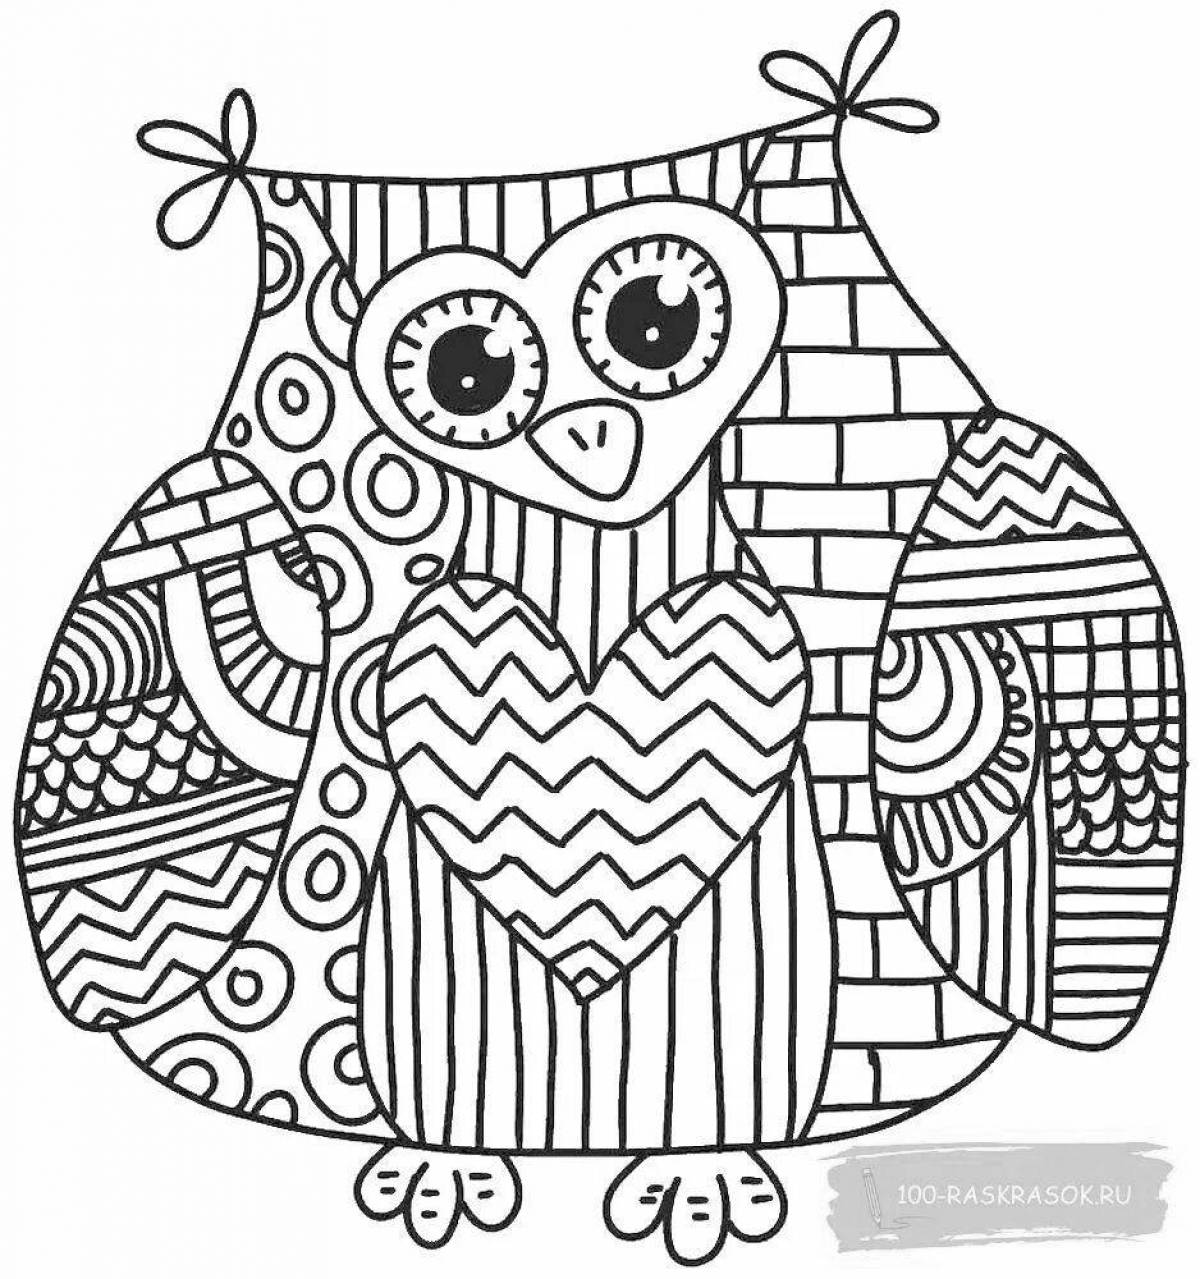 Creative anti-stress coloring book for 5-6 year olds